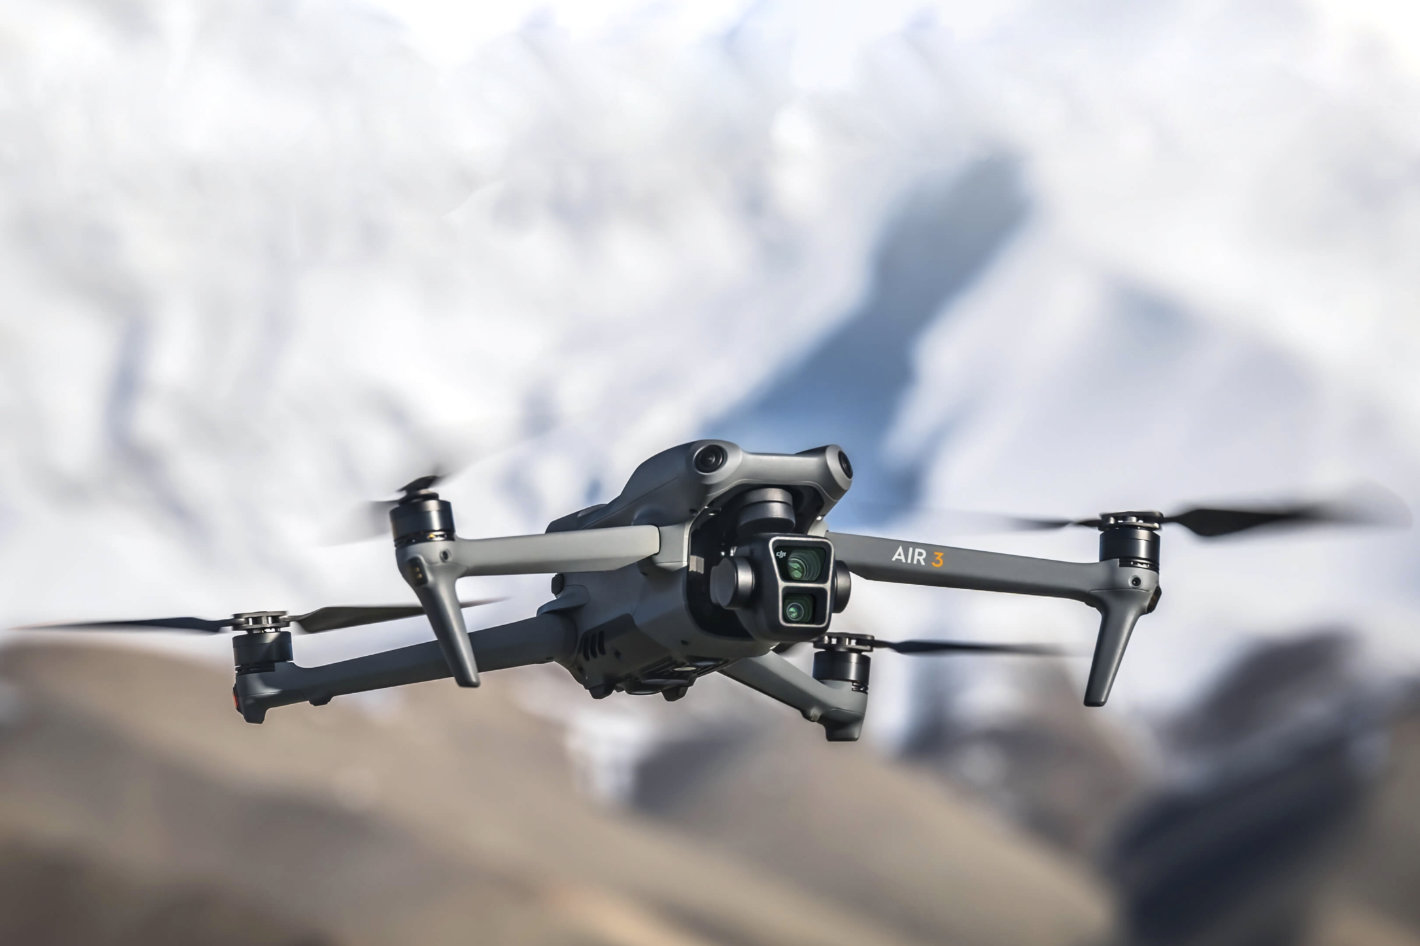 Ultimate HD Drone Review: The Perfect Gift for Him